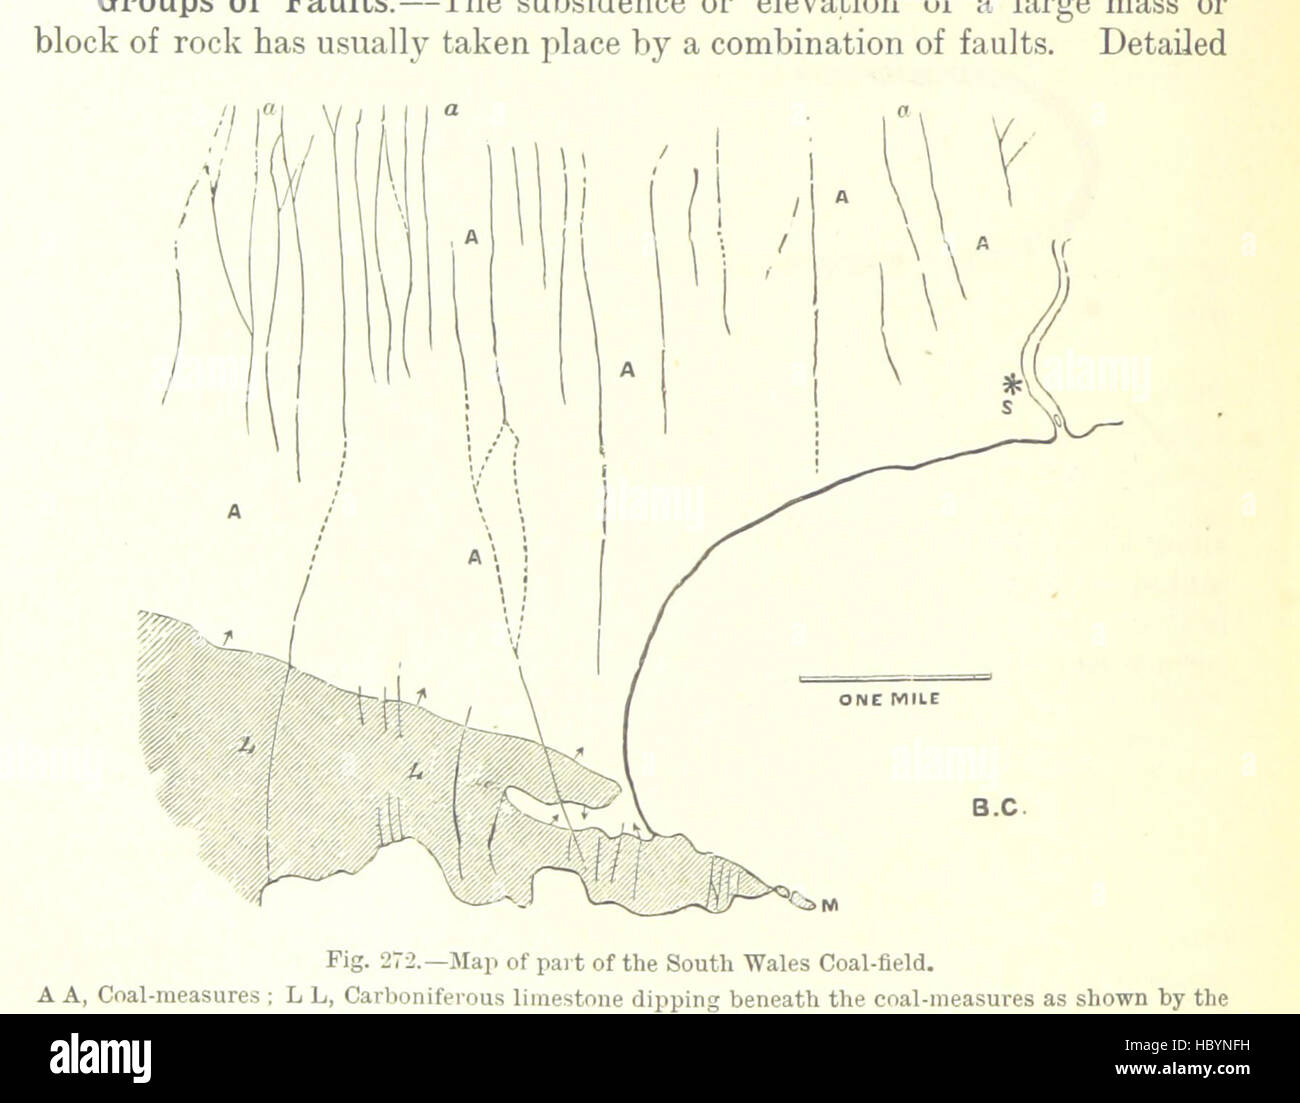 Image taken from page 578 of 'Text-book of Geology ... Third edition, revised and enlarged' Image taken from page 578 of 'Text-book of Geology Stock Photo